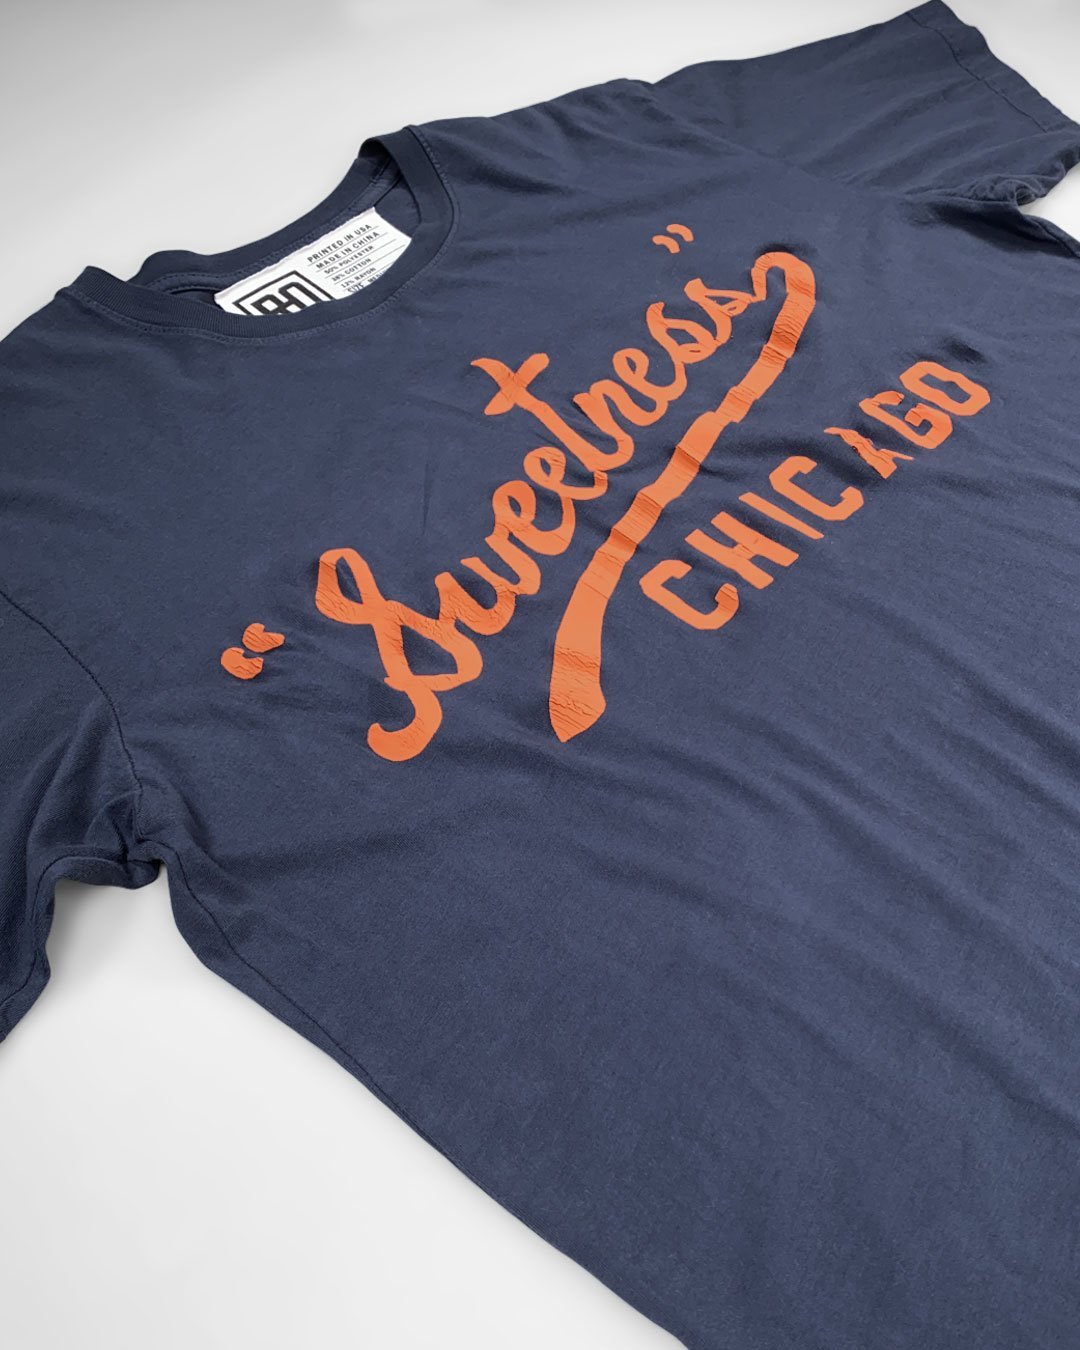 Walter Payton Sweetness Script Tee - Roots of Inc dba Roots of Fight